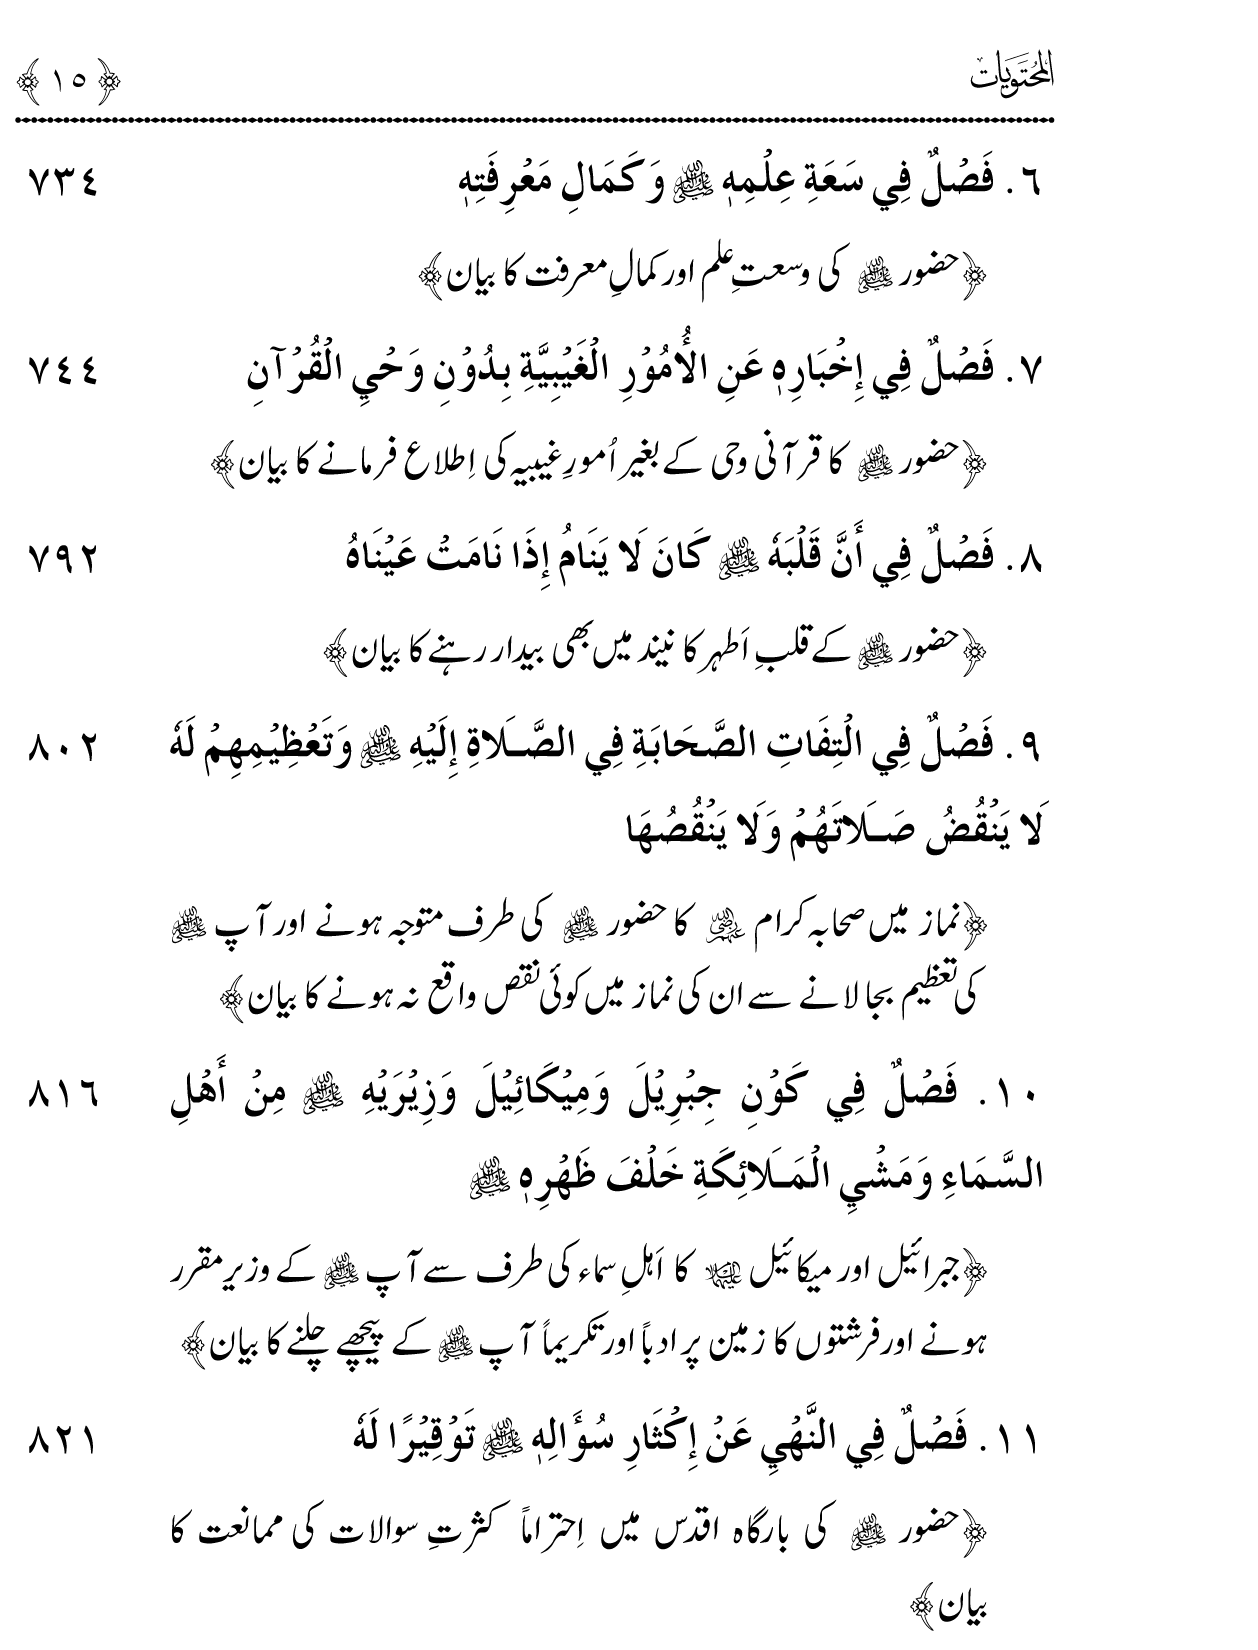 Ladders of Sunna for Deliverance from Deviation and Tribulations (Vol. 3)